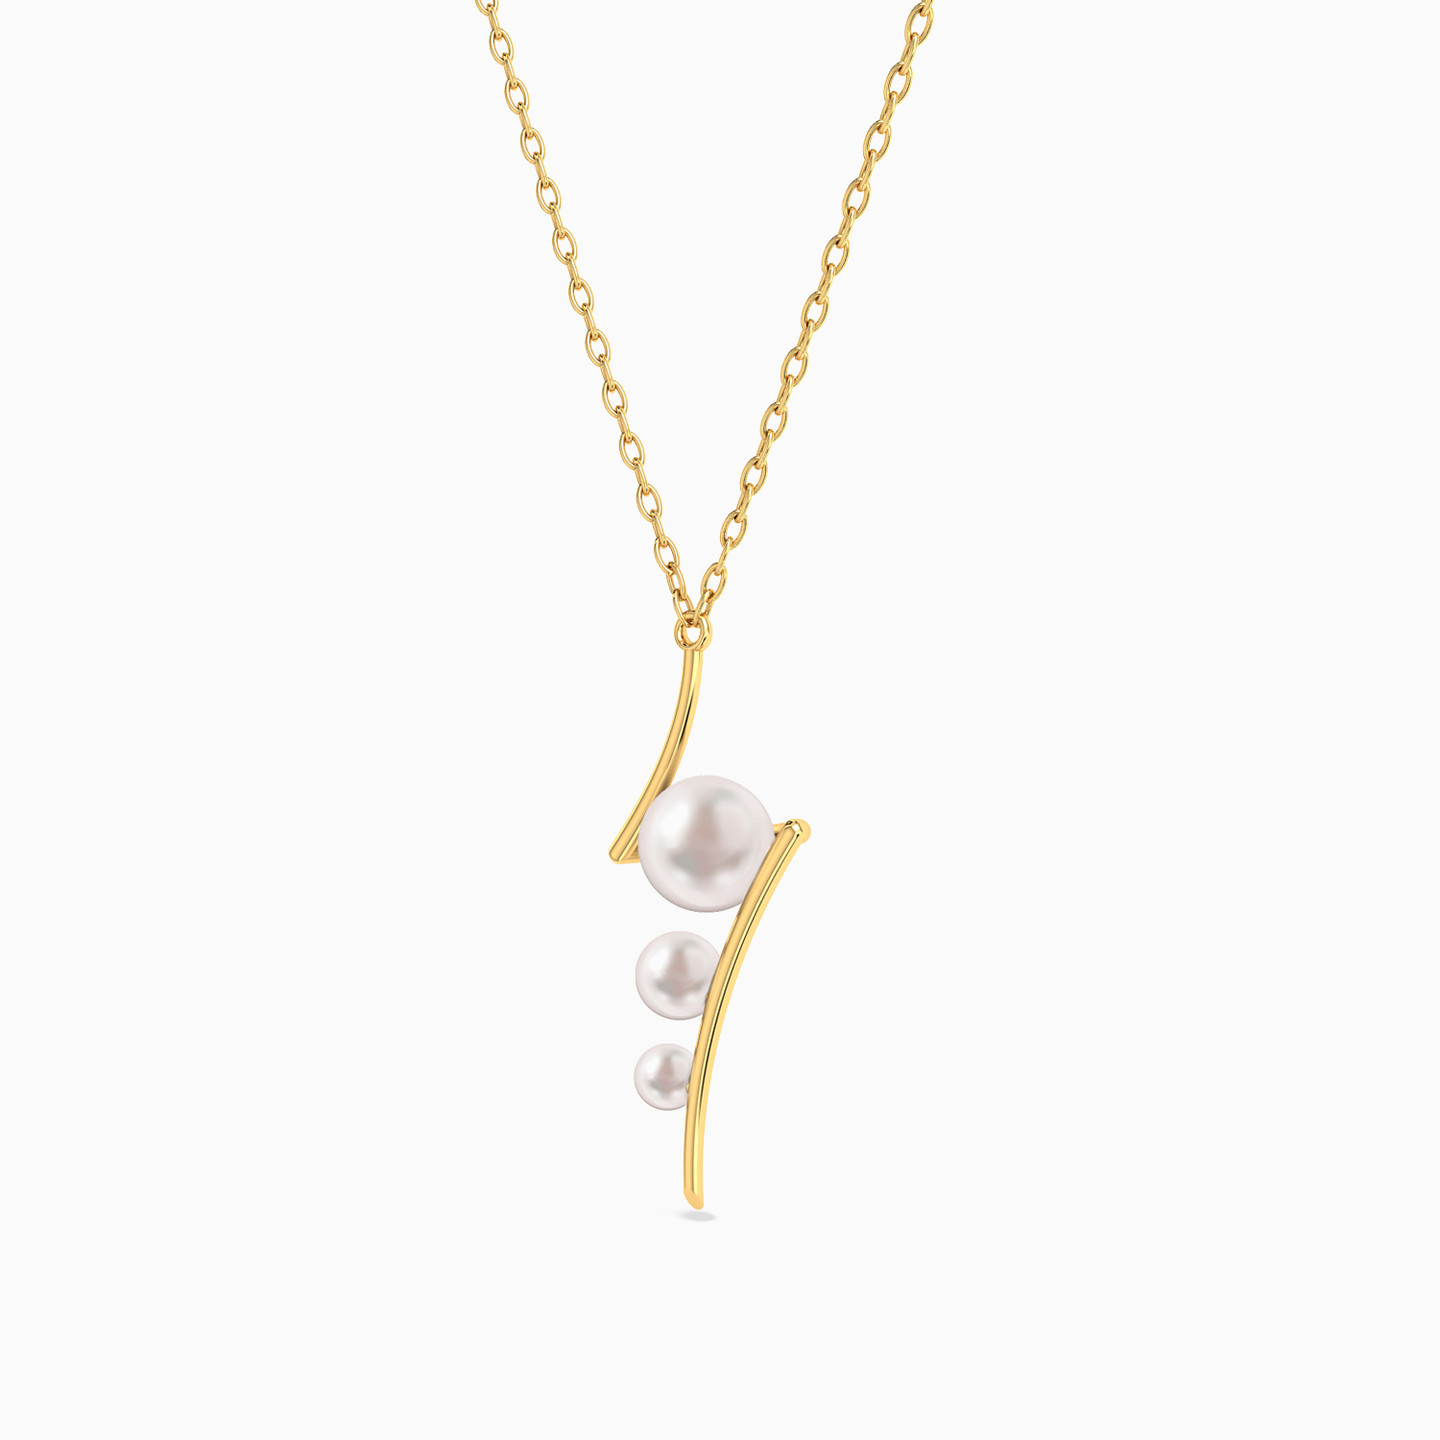 18K Gold Pearls Pendant Necklace - 3